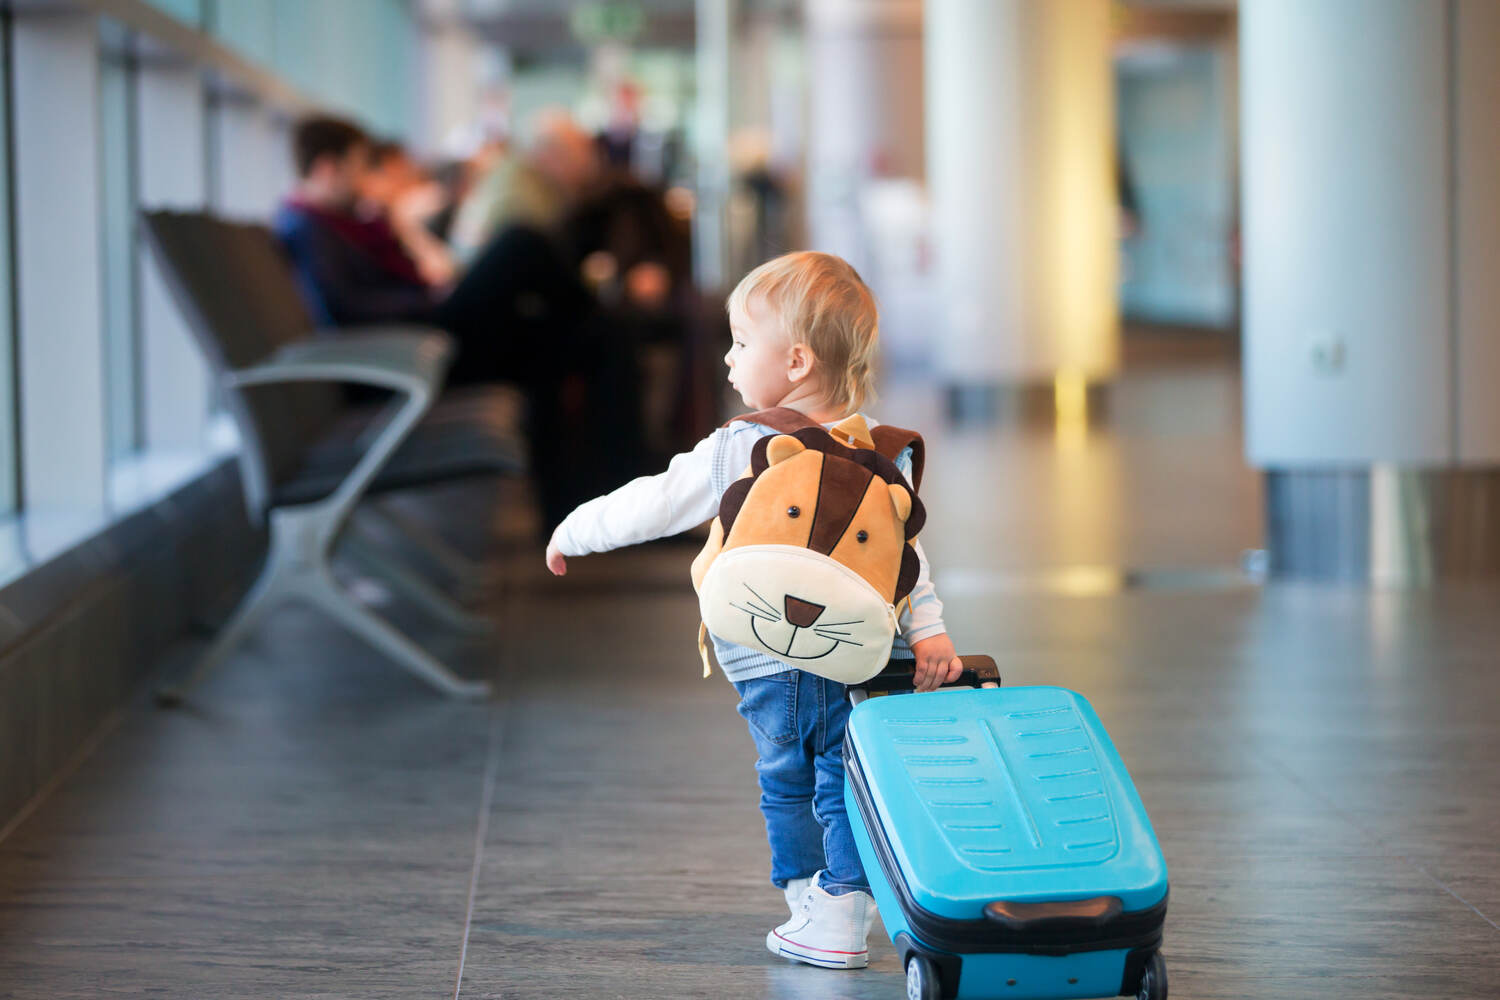 12 Tips to Travel Safe With a Toddler